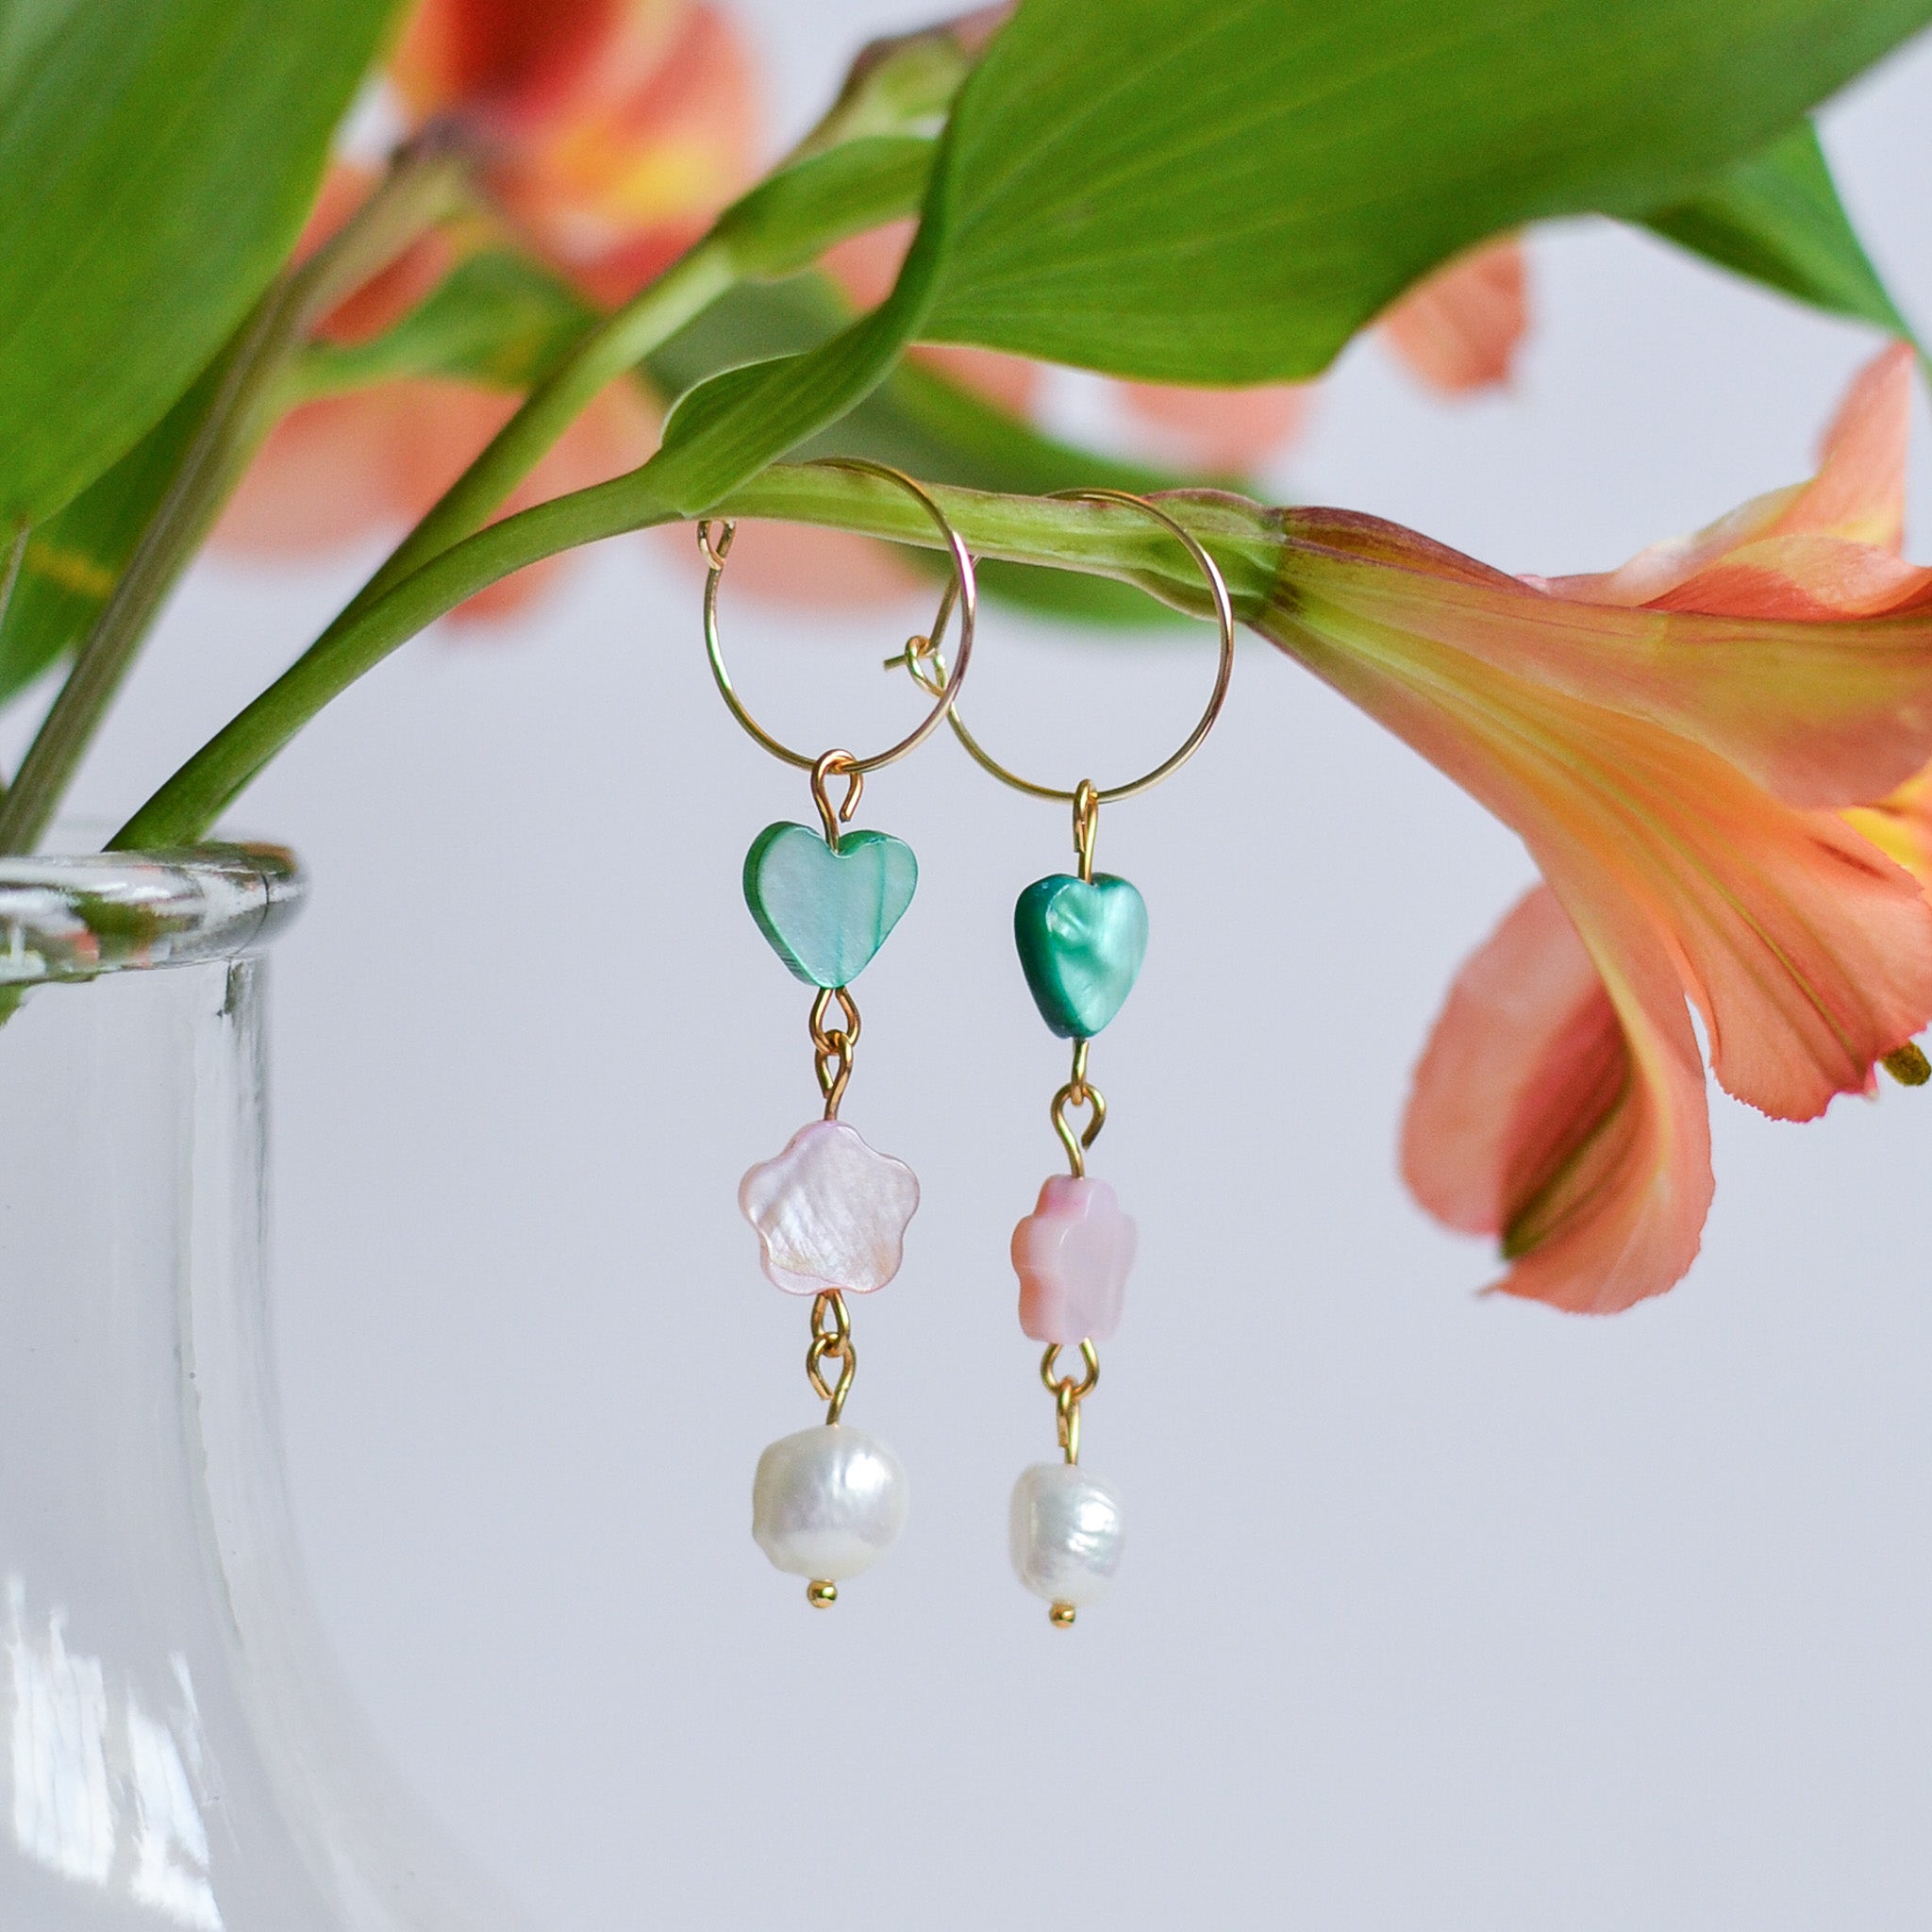 dangly hoop earrings, heart and flower beads, and freshwater pearls